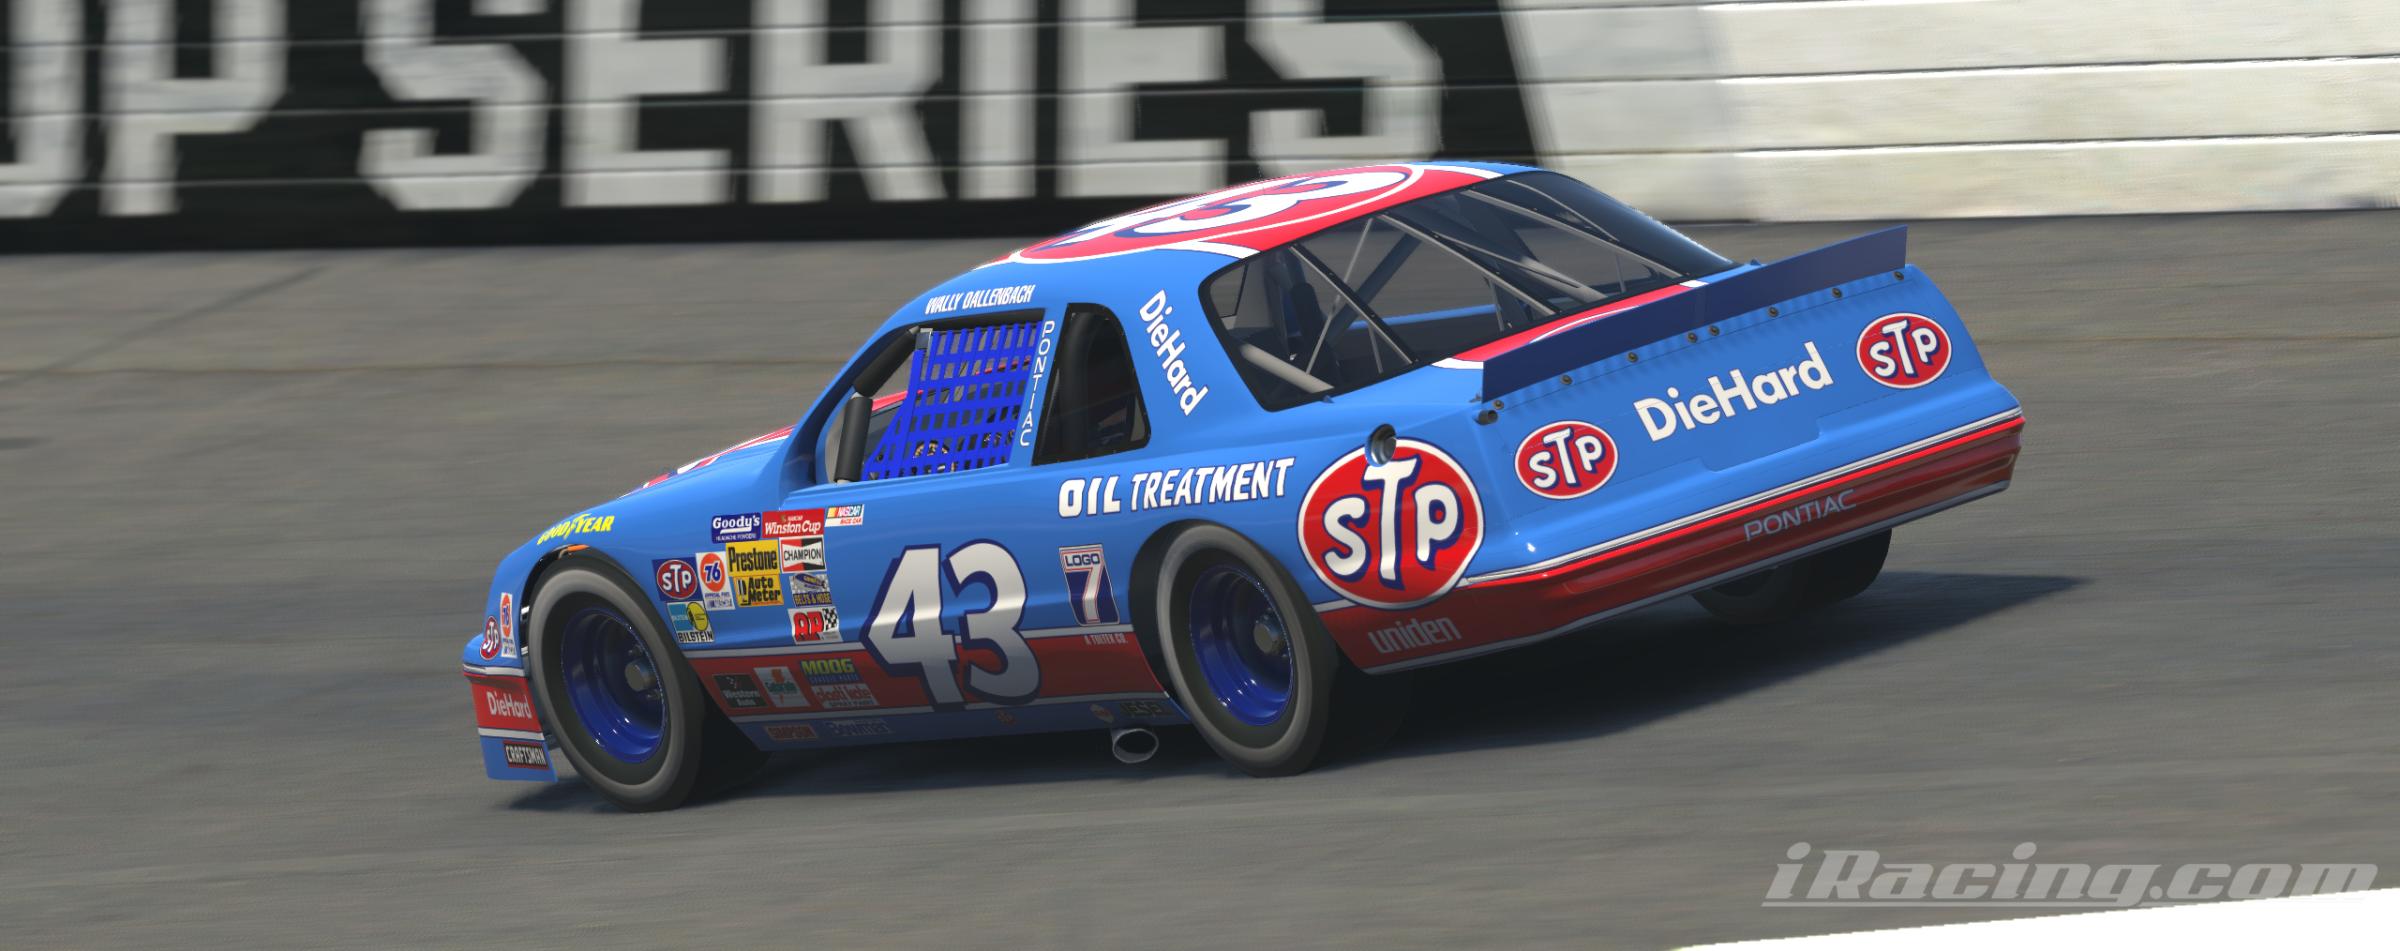 Preview of 1994 #43 Wally Dallenbach, Jr. STP Pontiac - Winston Cup by William Goshen